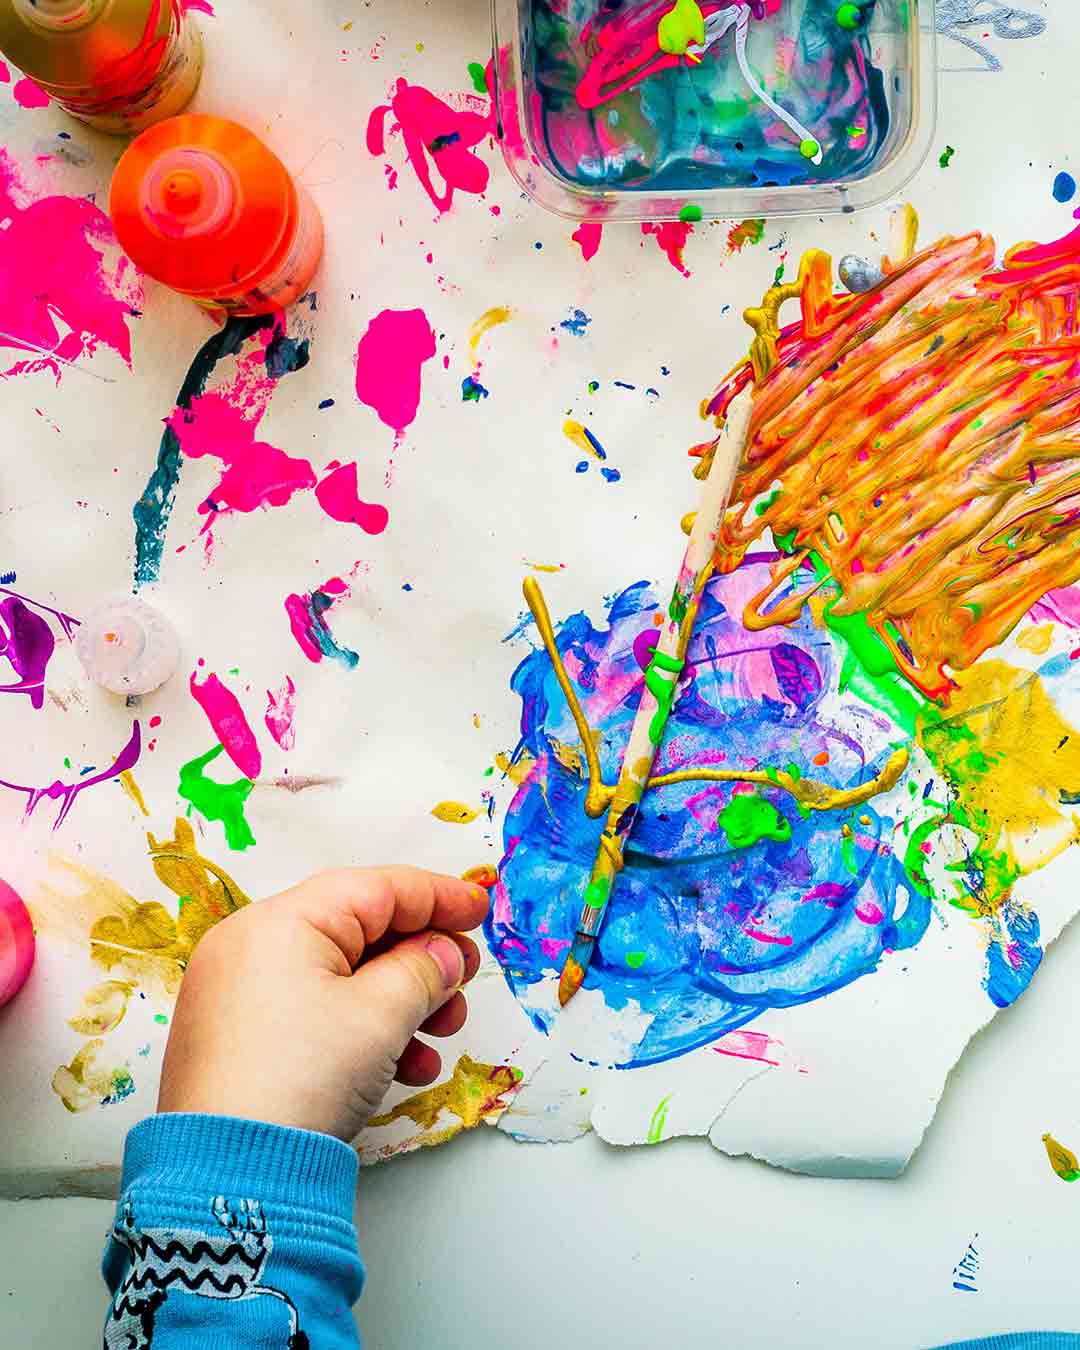 Stock image of child playing with colorful paints.